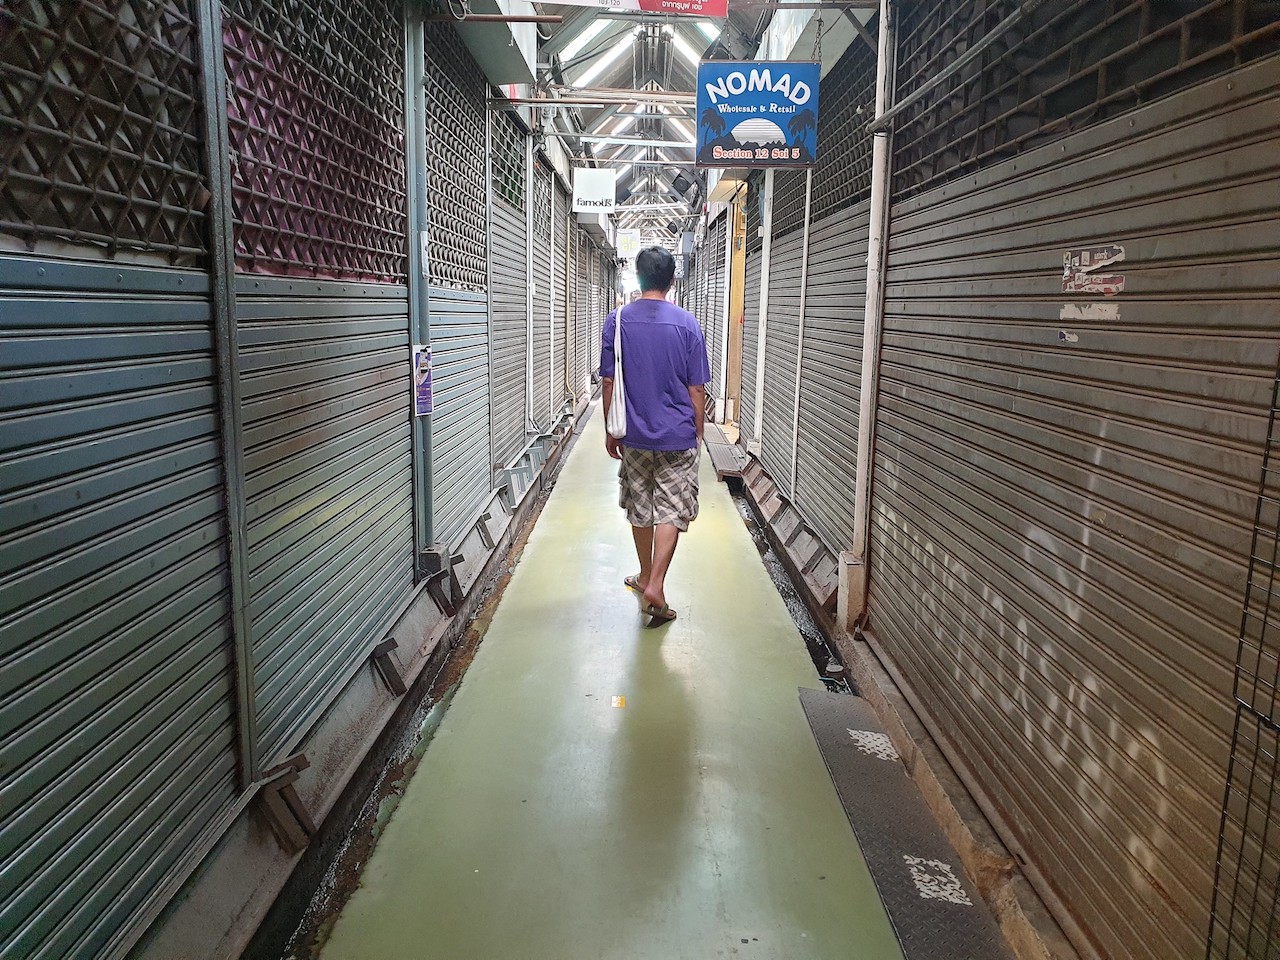 Quiet Chatuchak market in Bangkok. The market is empty due to COVID-19 pandemic and lack of tourists